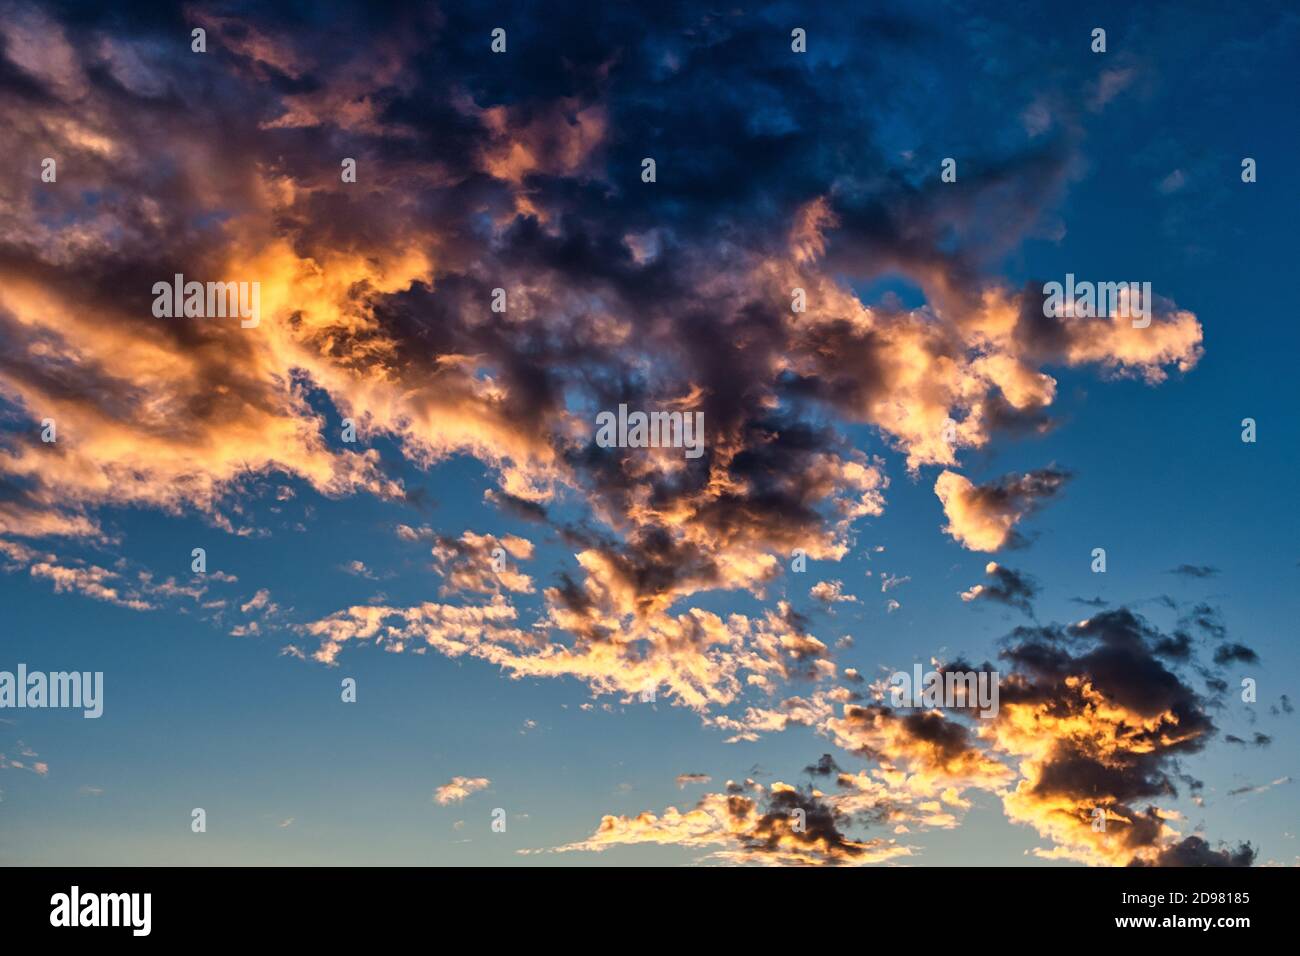 Epic sunset cloudscape with golden colors in blue sky. Stock Photo